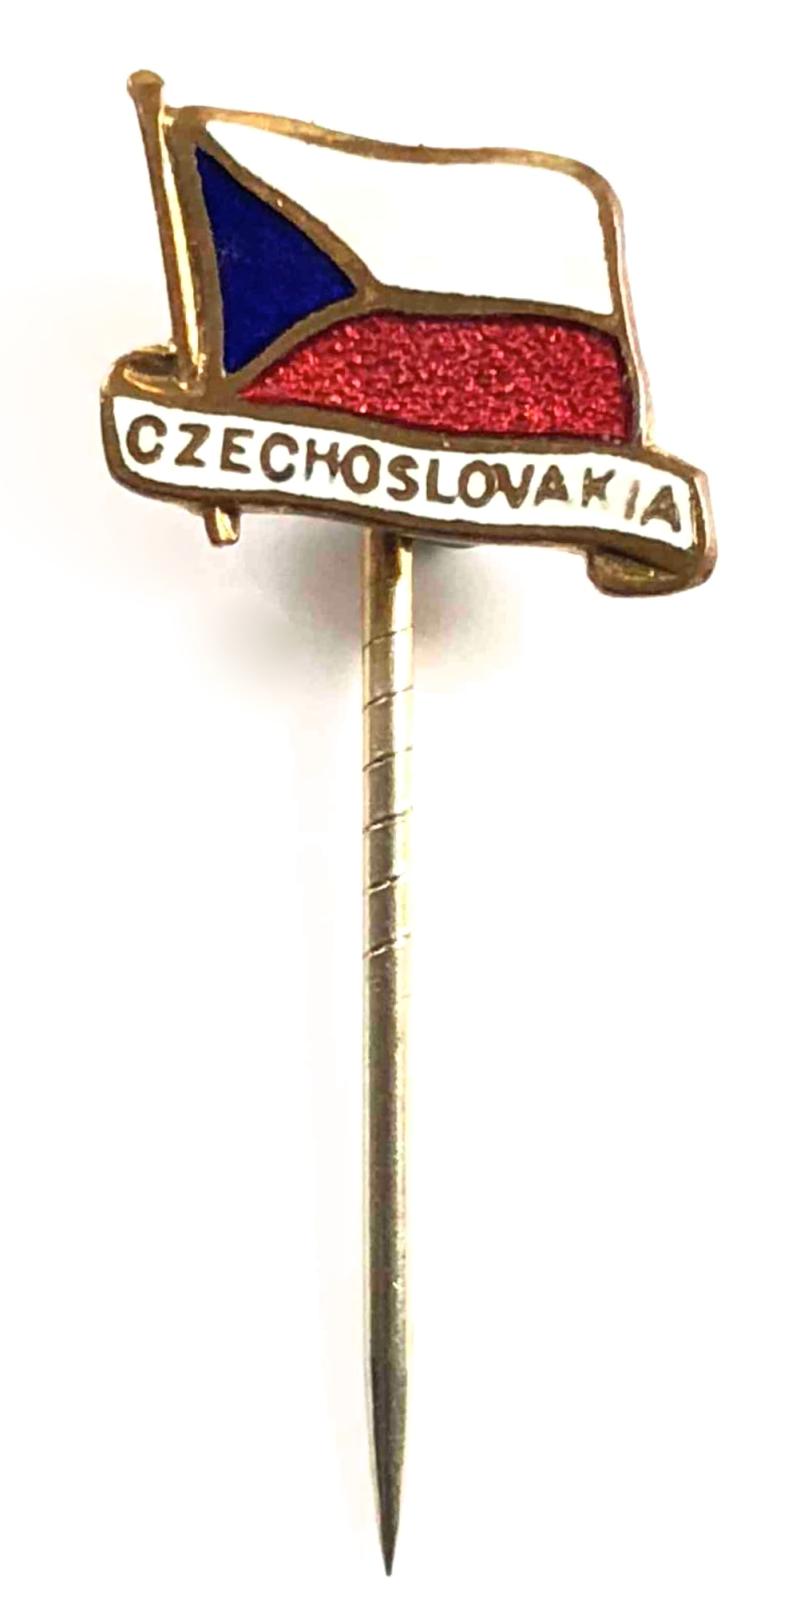 Czechoslovakia National Flag supporters pin badge by H.W.Miller